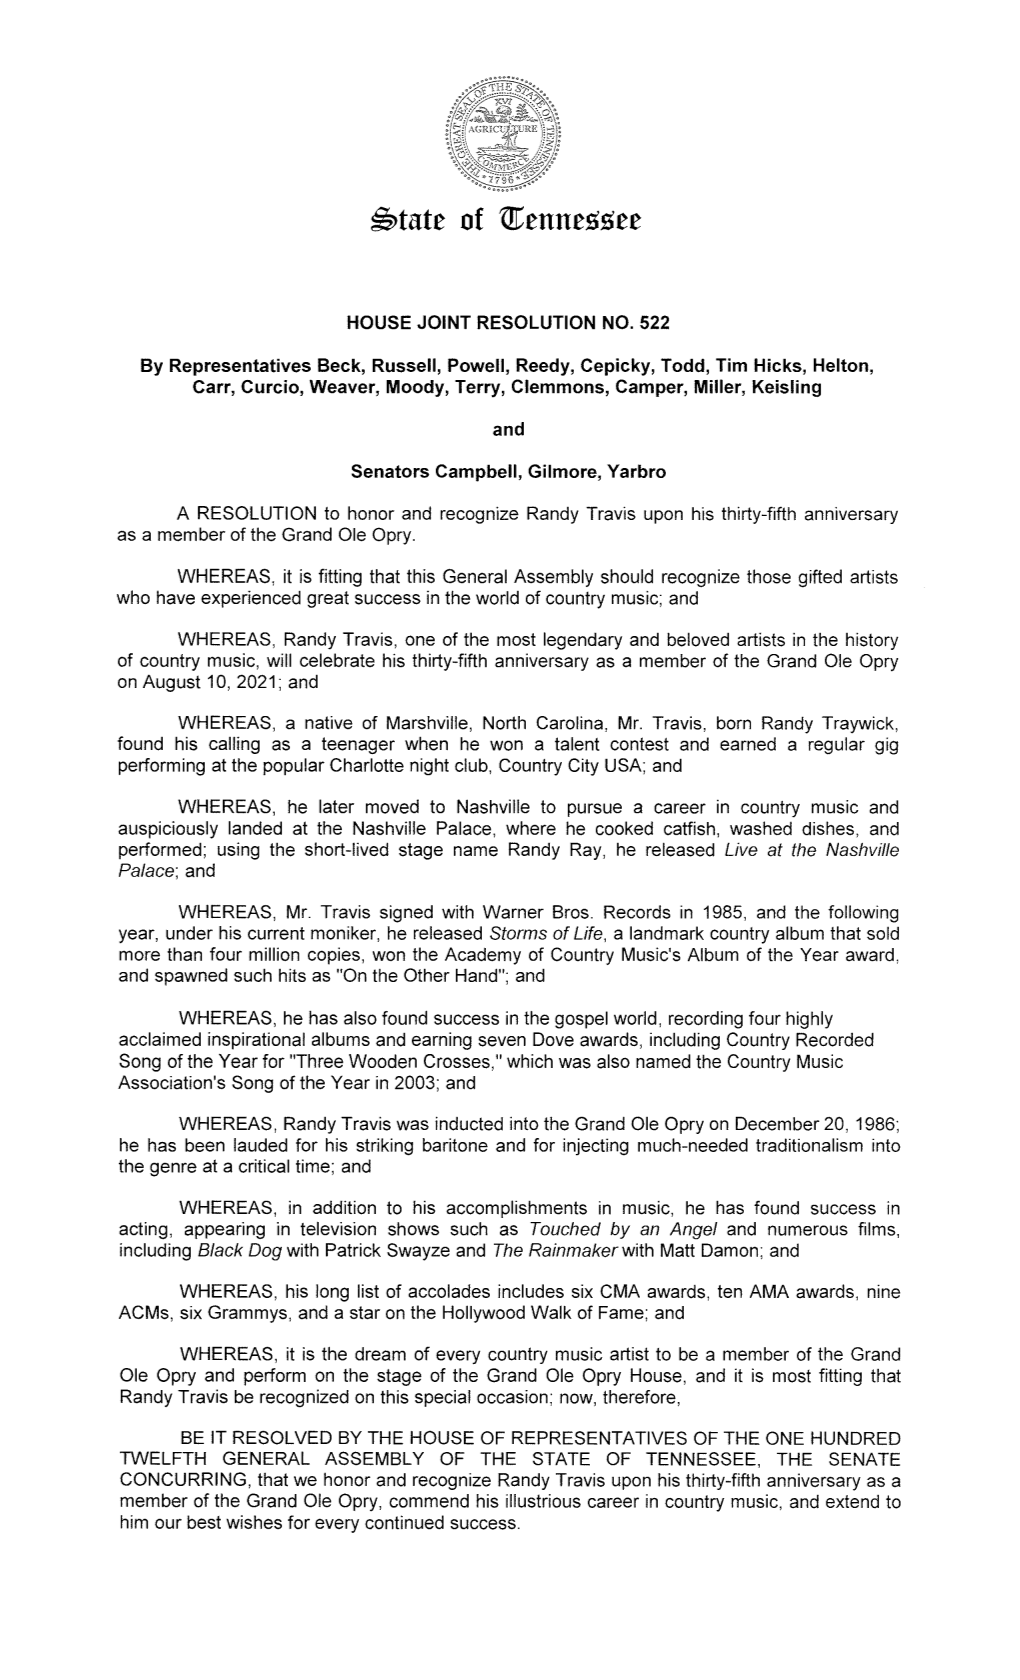 HOUSE JOINT RESOLUTION NO. 522 by Representatives Beck, Russell